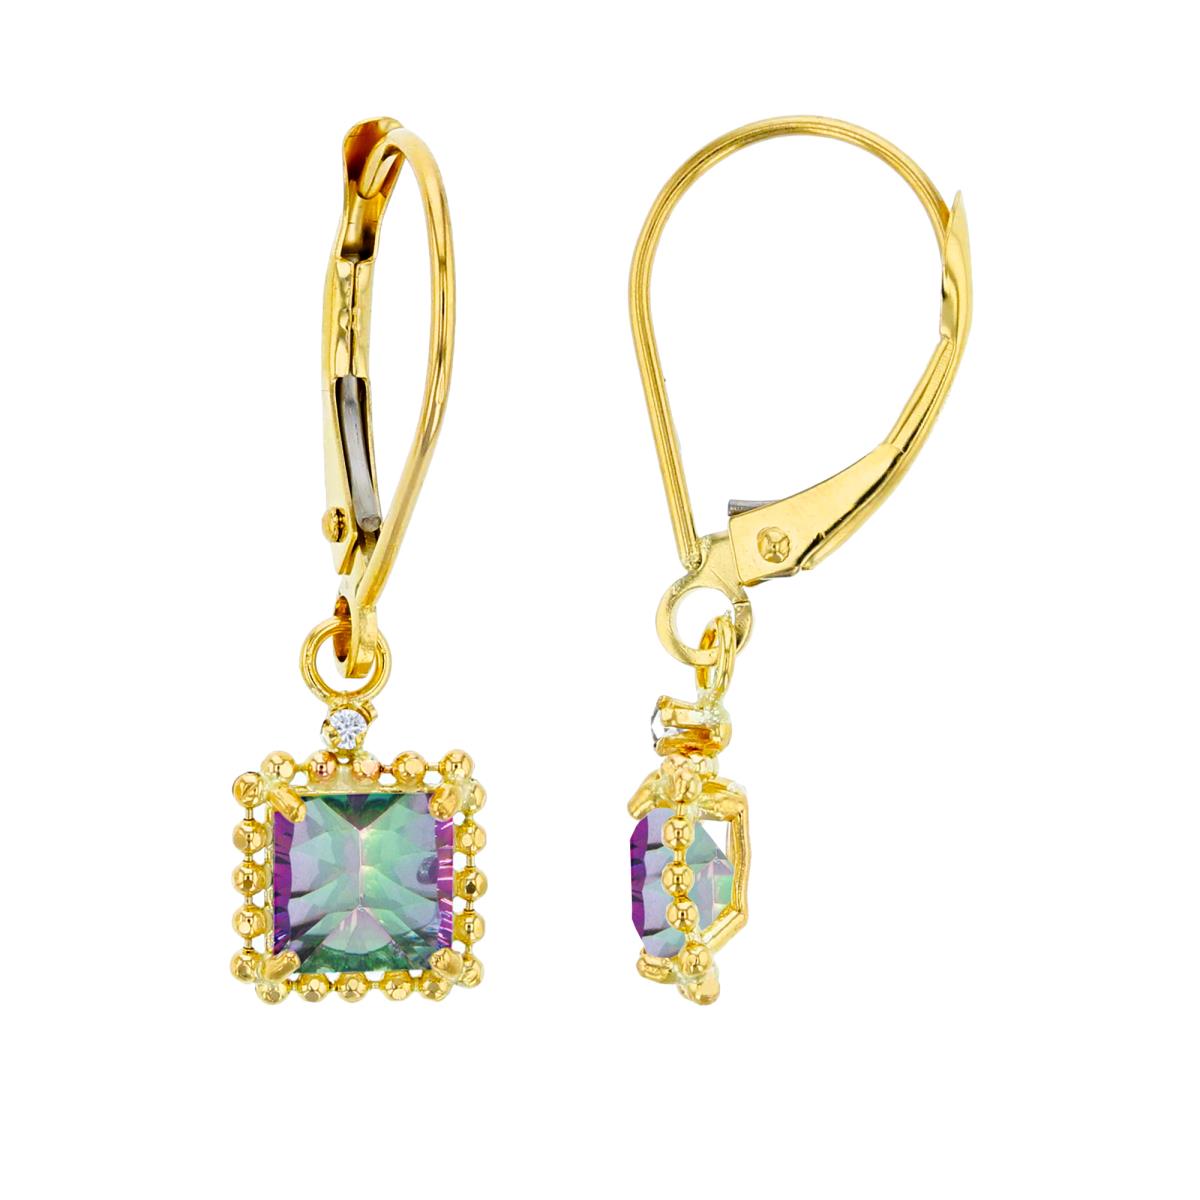 14K Yellow Gold 1.25mm Rd Created White Sapphire & 5mm Sq Mystic Green Topaz Bead Frame Drop Lever-Back Earring